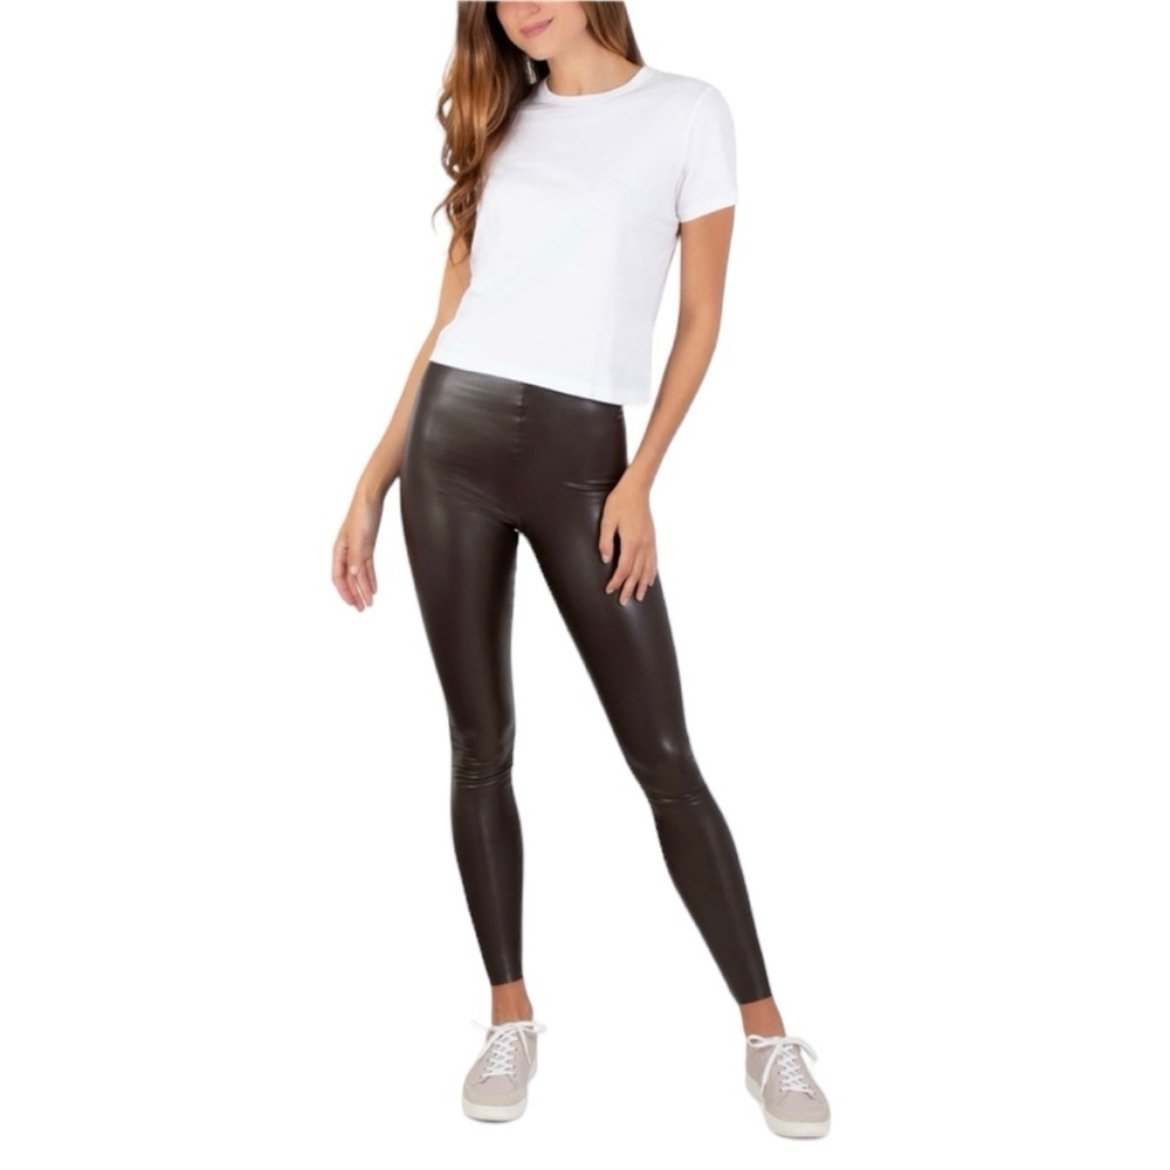 Buy Joie Seamless Stretch Faux Leather Pull-On High rise leggings black XXL KSRnGU1iS Factory Price